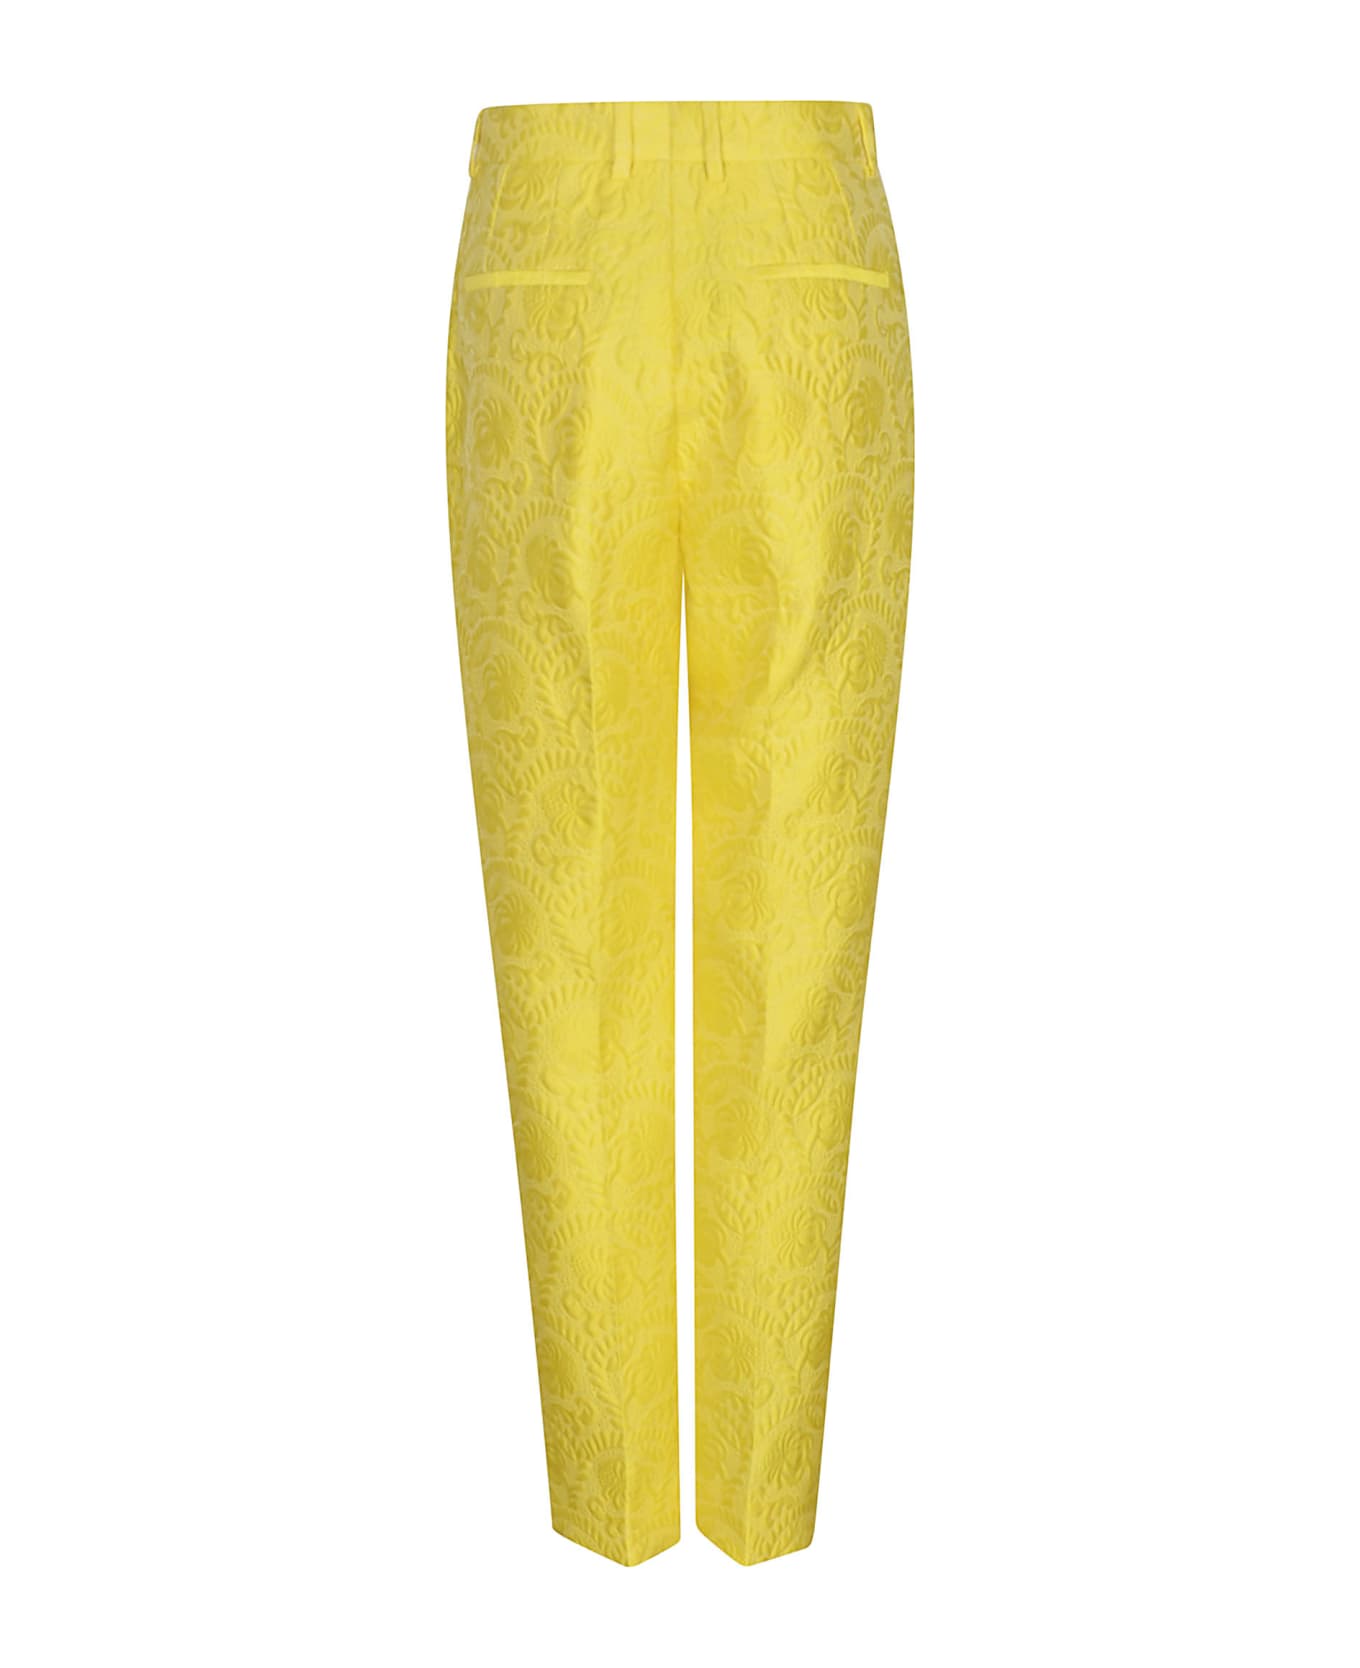 Dolce & Gabbana Buttoned Classic Trousers - yellow